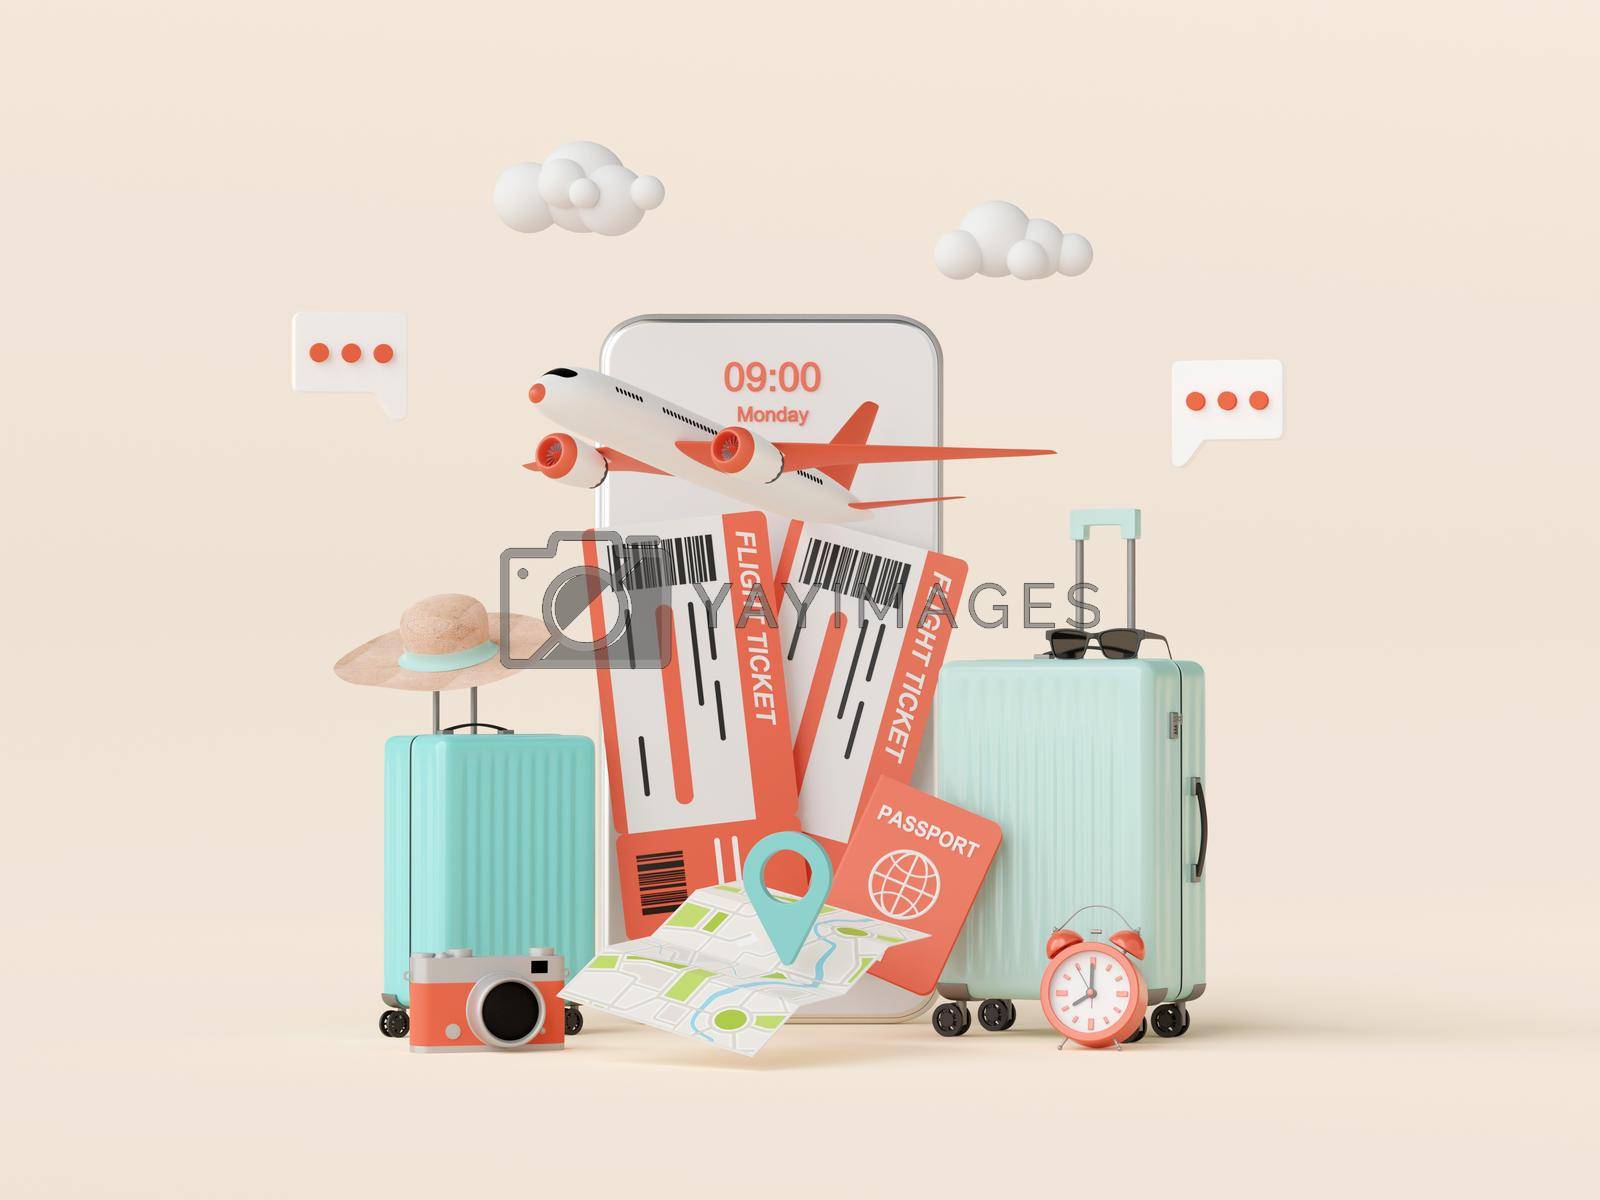 Royalty free image of Flight booking, buy ticket or checkin application on smartphone, 3d illustration by nutzchotwarut